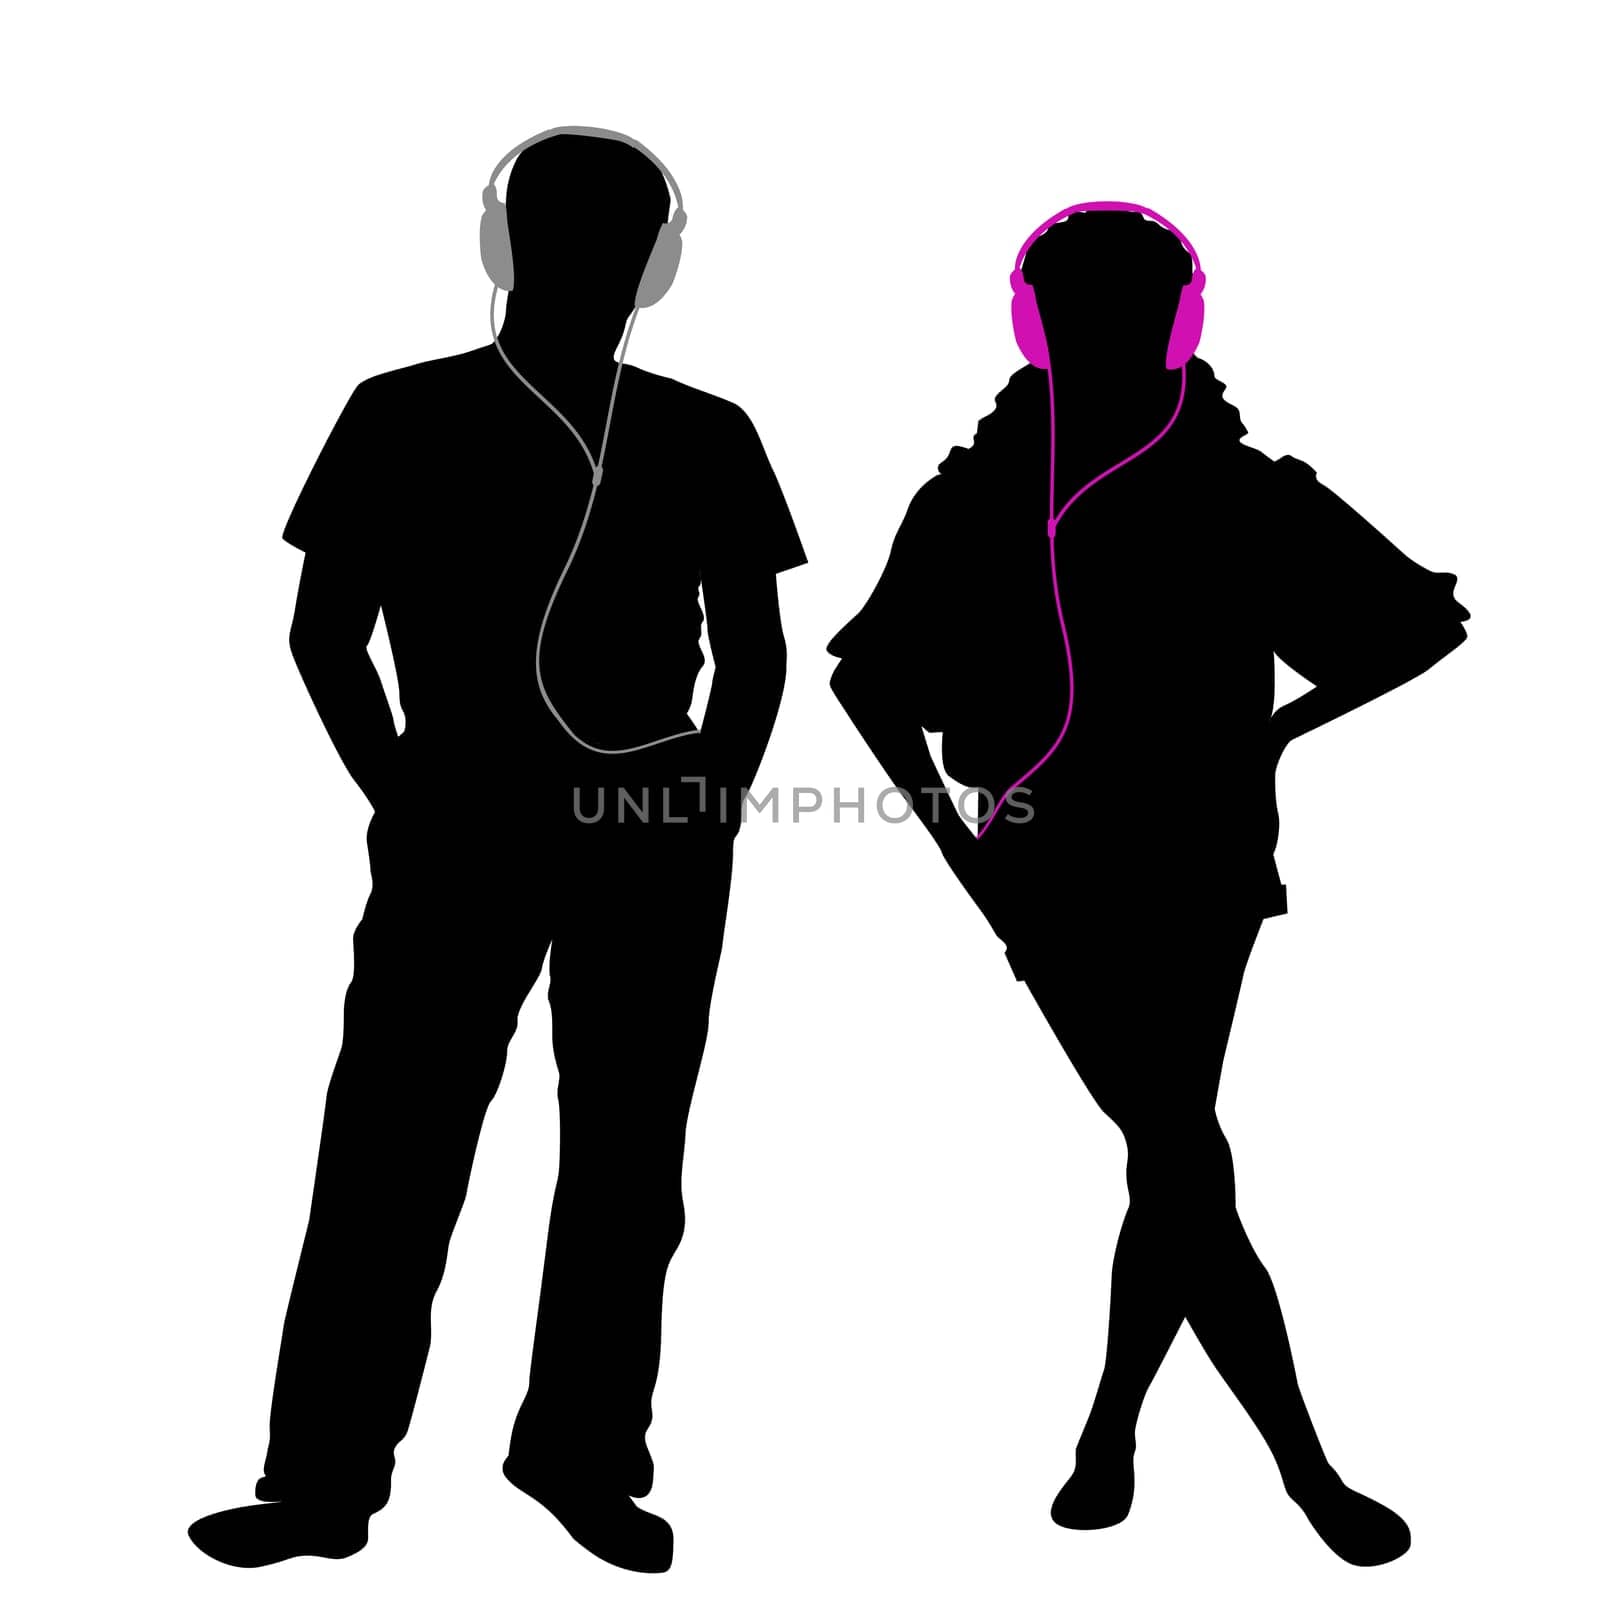 Silhouettes of man and woman with headphones by hibrida13